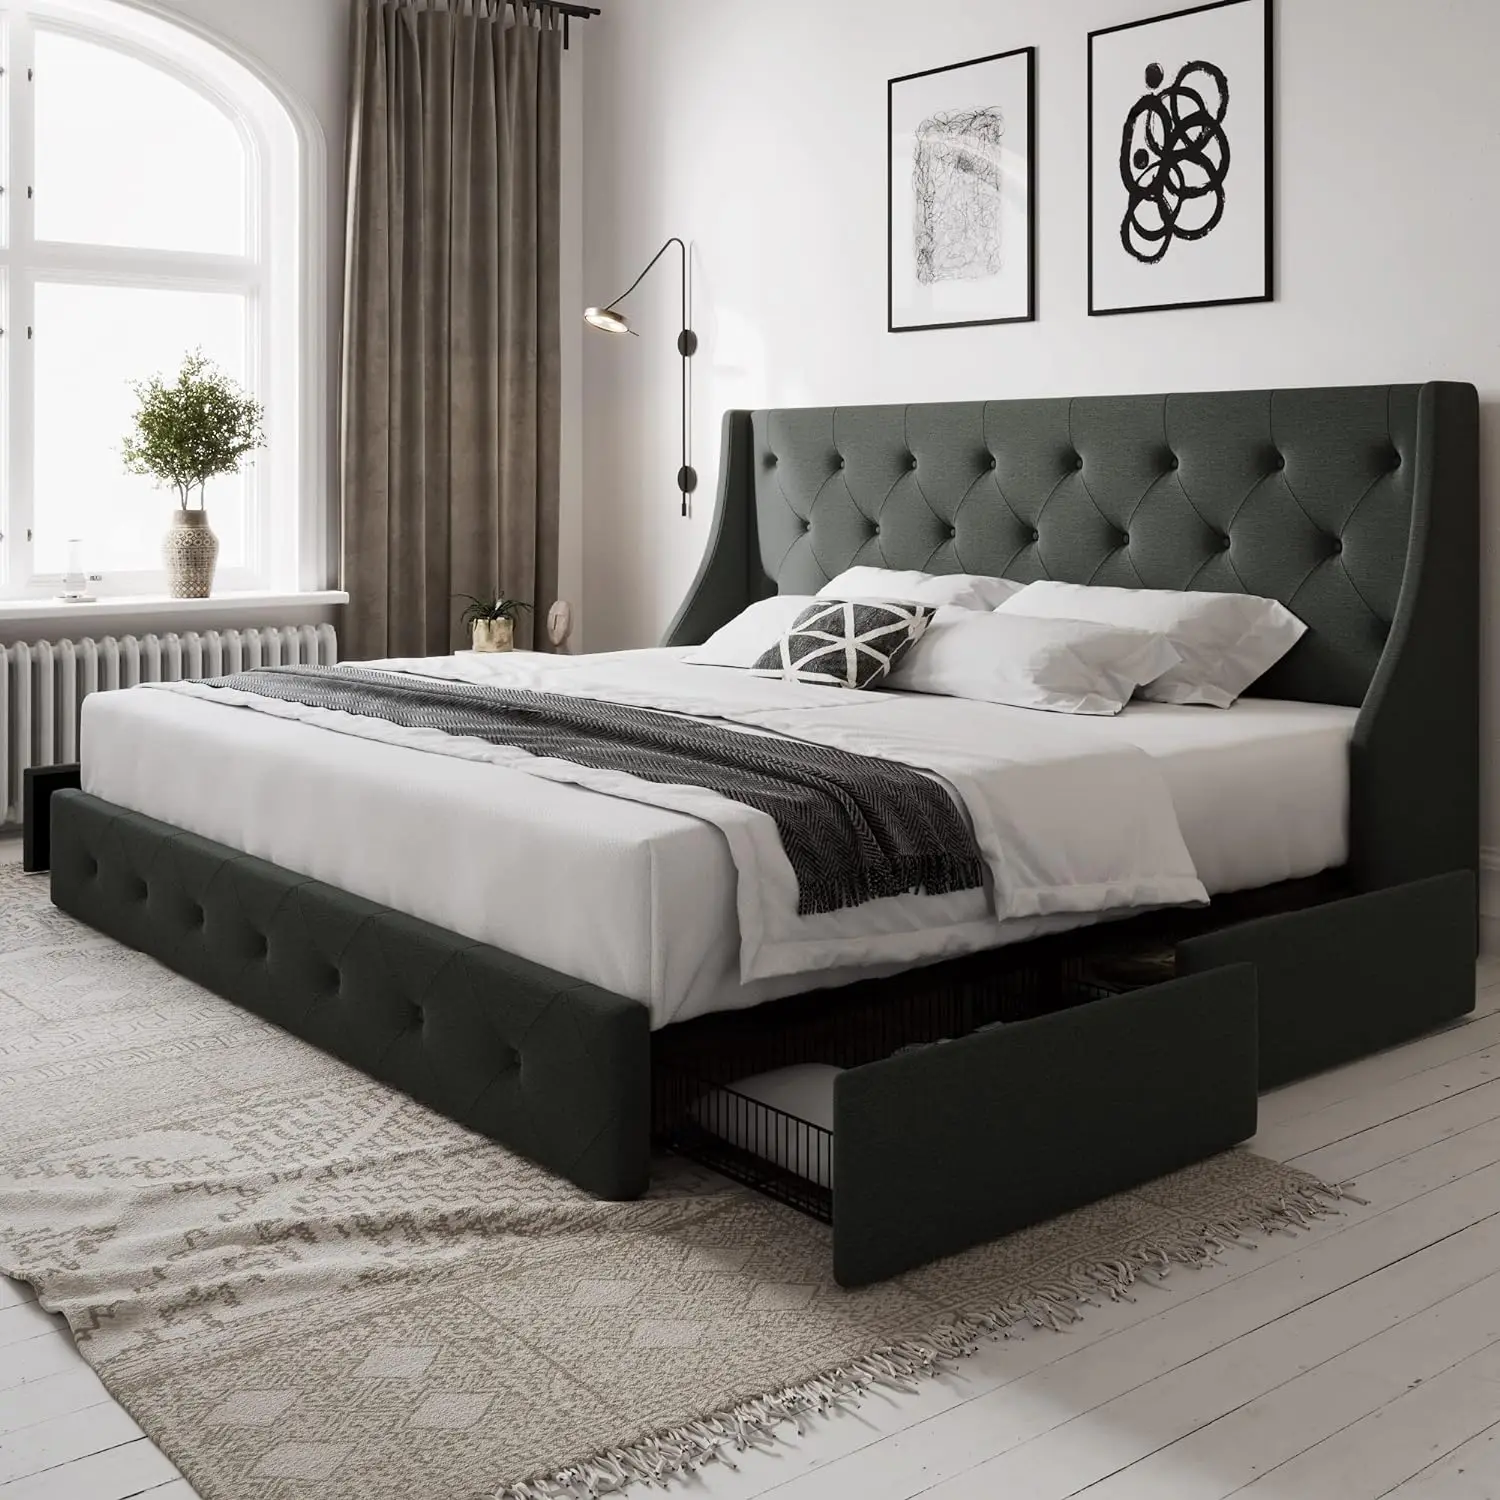 

New Queen Bed Frame with 4 Storage Drawers and Wingback Headboard, Button Tufted Design, No Box Spring Needed, Dark Grey